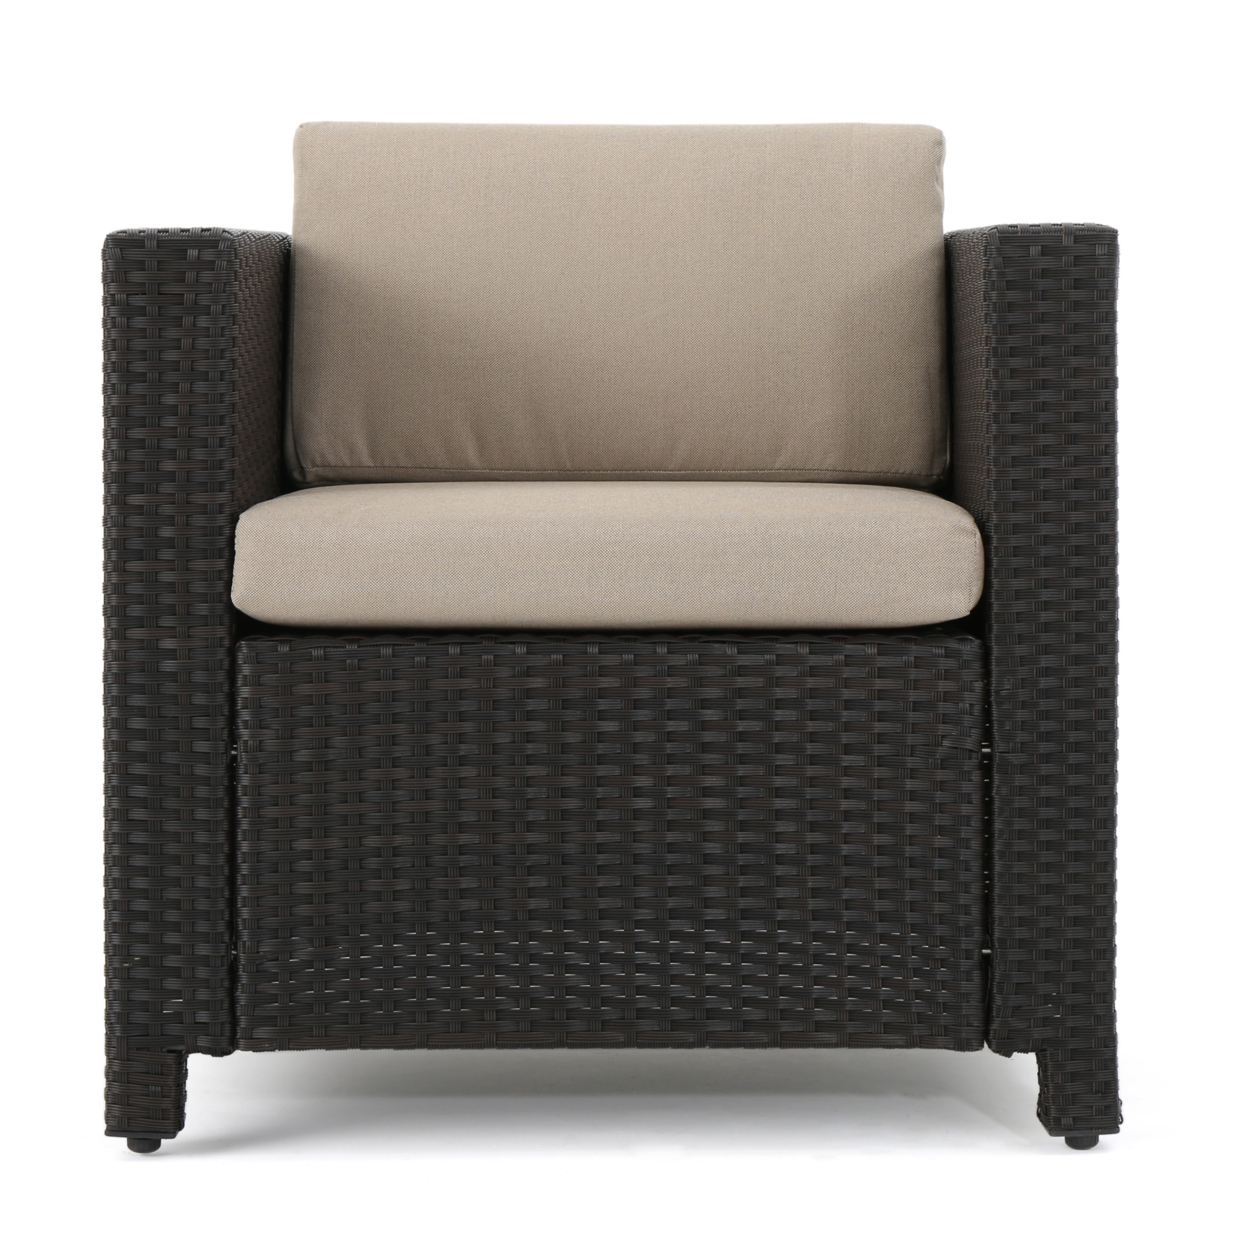 Emily Outdoor 8 Seater Wicker Chat Set With Side Tables - Mix Black + Dark Gray